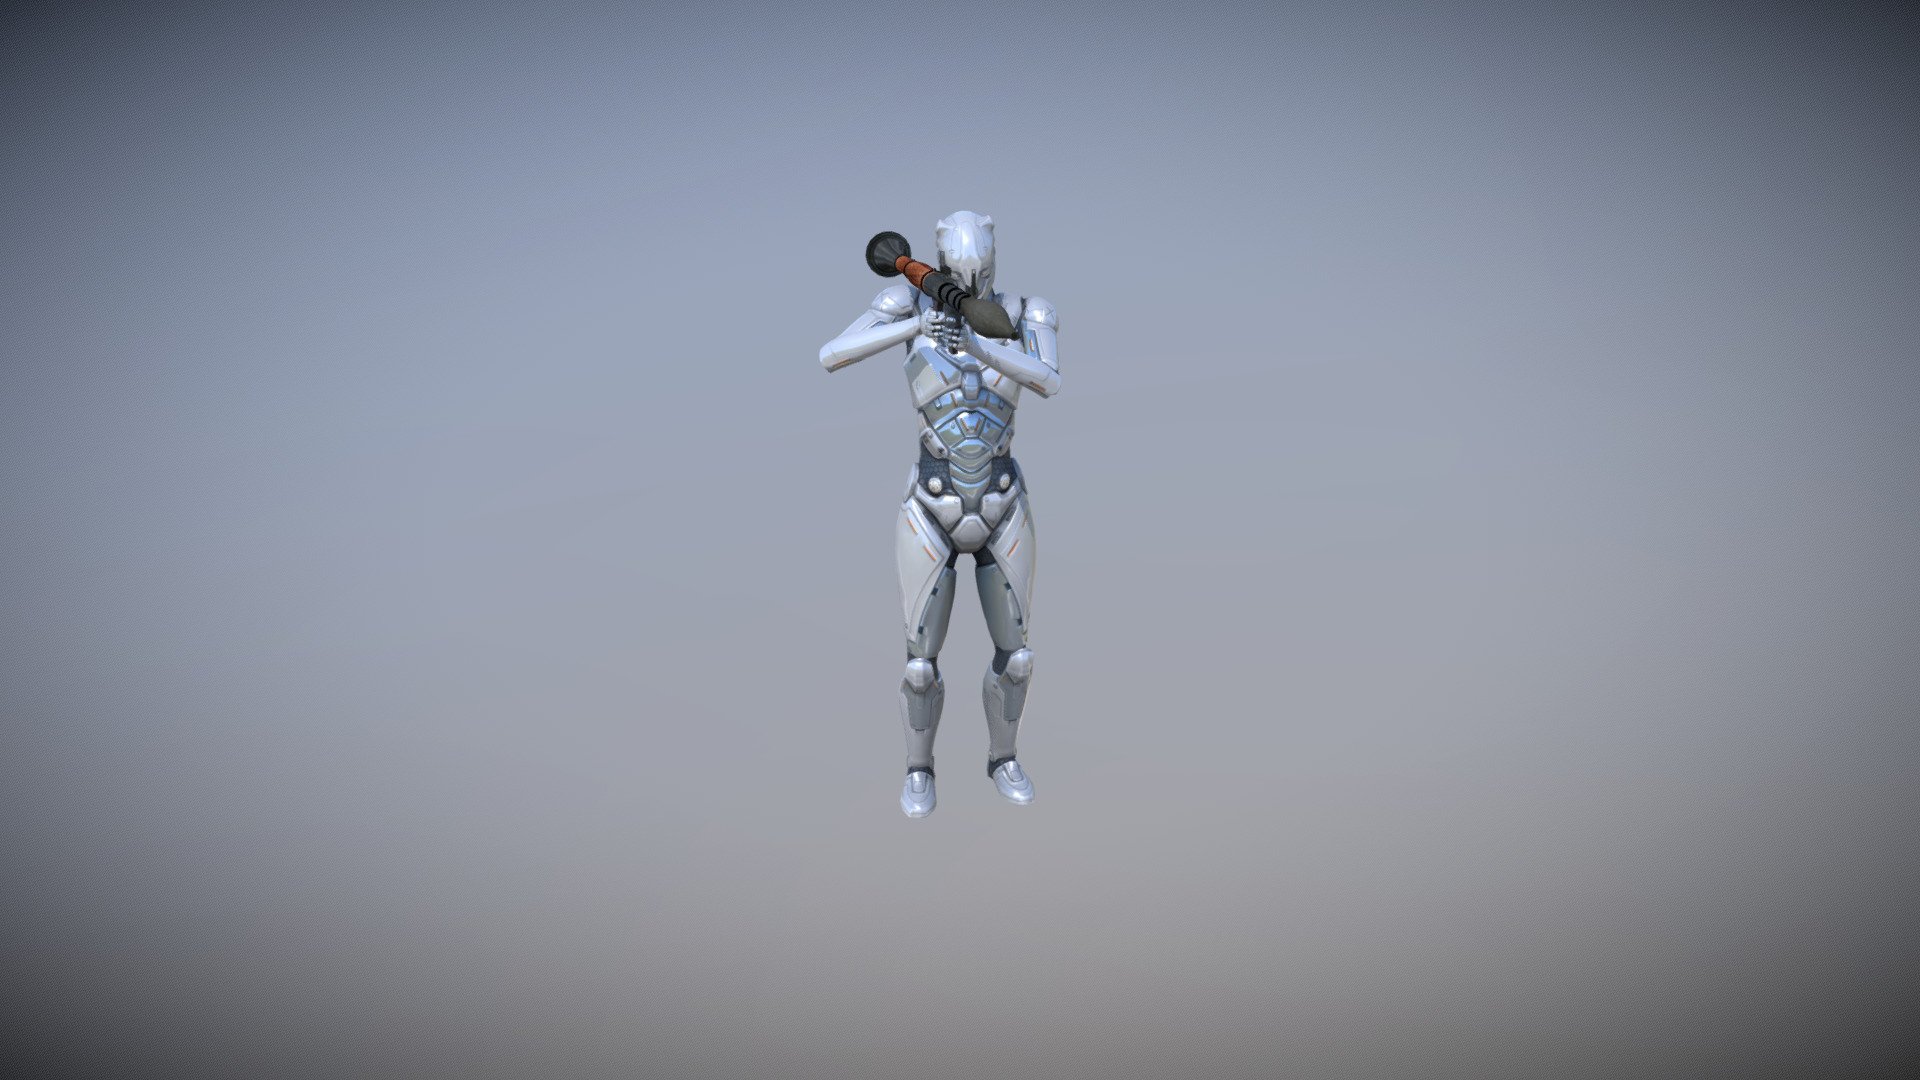 An RPG replica with equivalent weight was used to capture these animations. Every motion was recorded from start to finish. These are great not only for game development, but film &amp; commercial productions or biometric scientific research.

Includes: Idle; Walk; Sneak; Turn; Hit; Shoot; Jump; Stop; Transitions.

The package comes with a fully textured cyborg model.

https://aaanimators.com - RPG/ Big Gun Advanced: Mocap Animation Pack - Buy Royalty Free 3D model by aaanimators 3d model